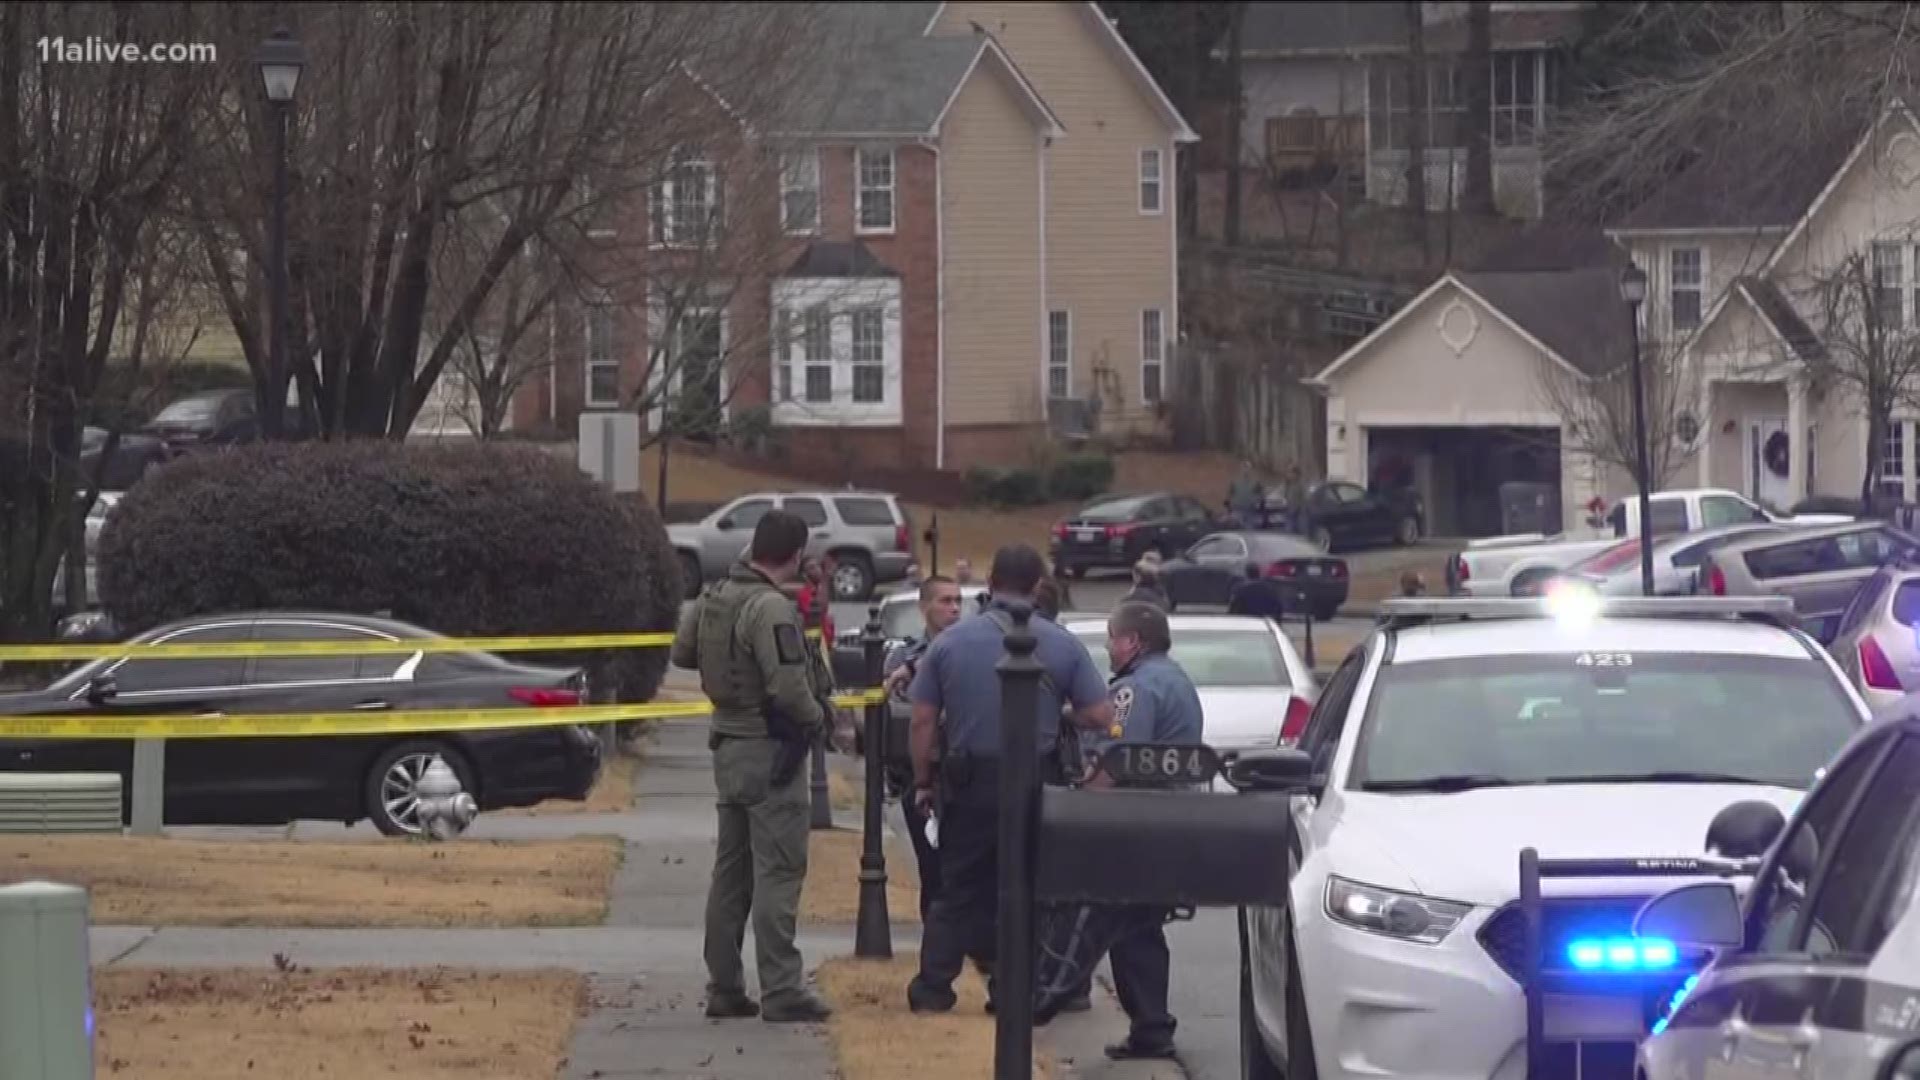 Police believe one teen shot the other and then shot himself a short time later.